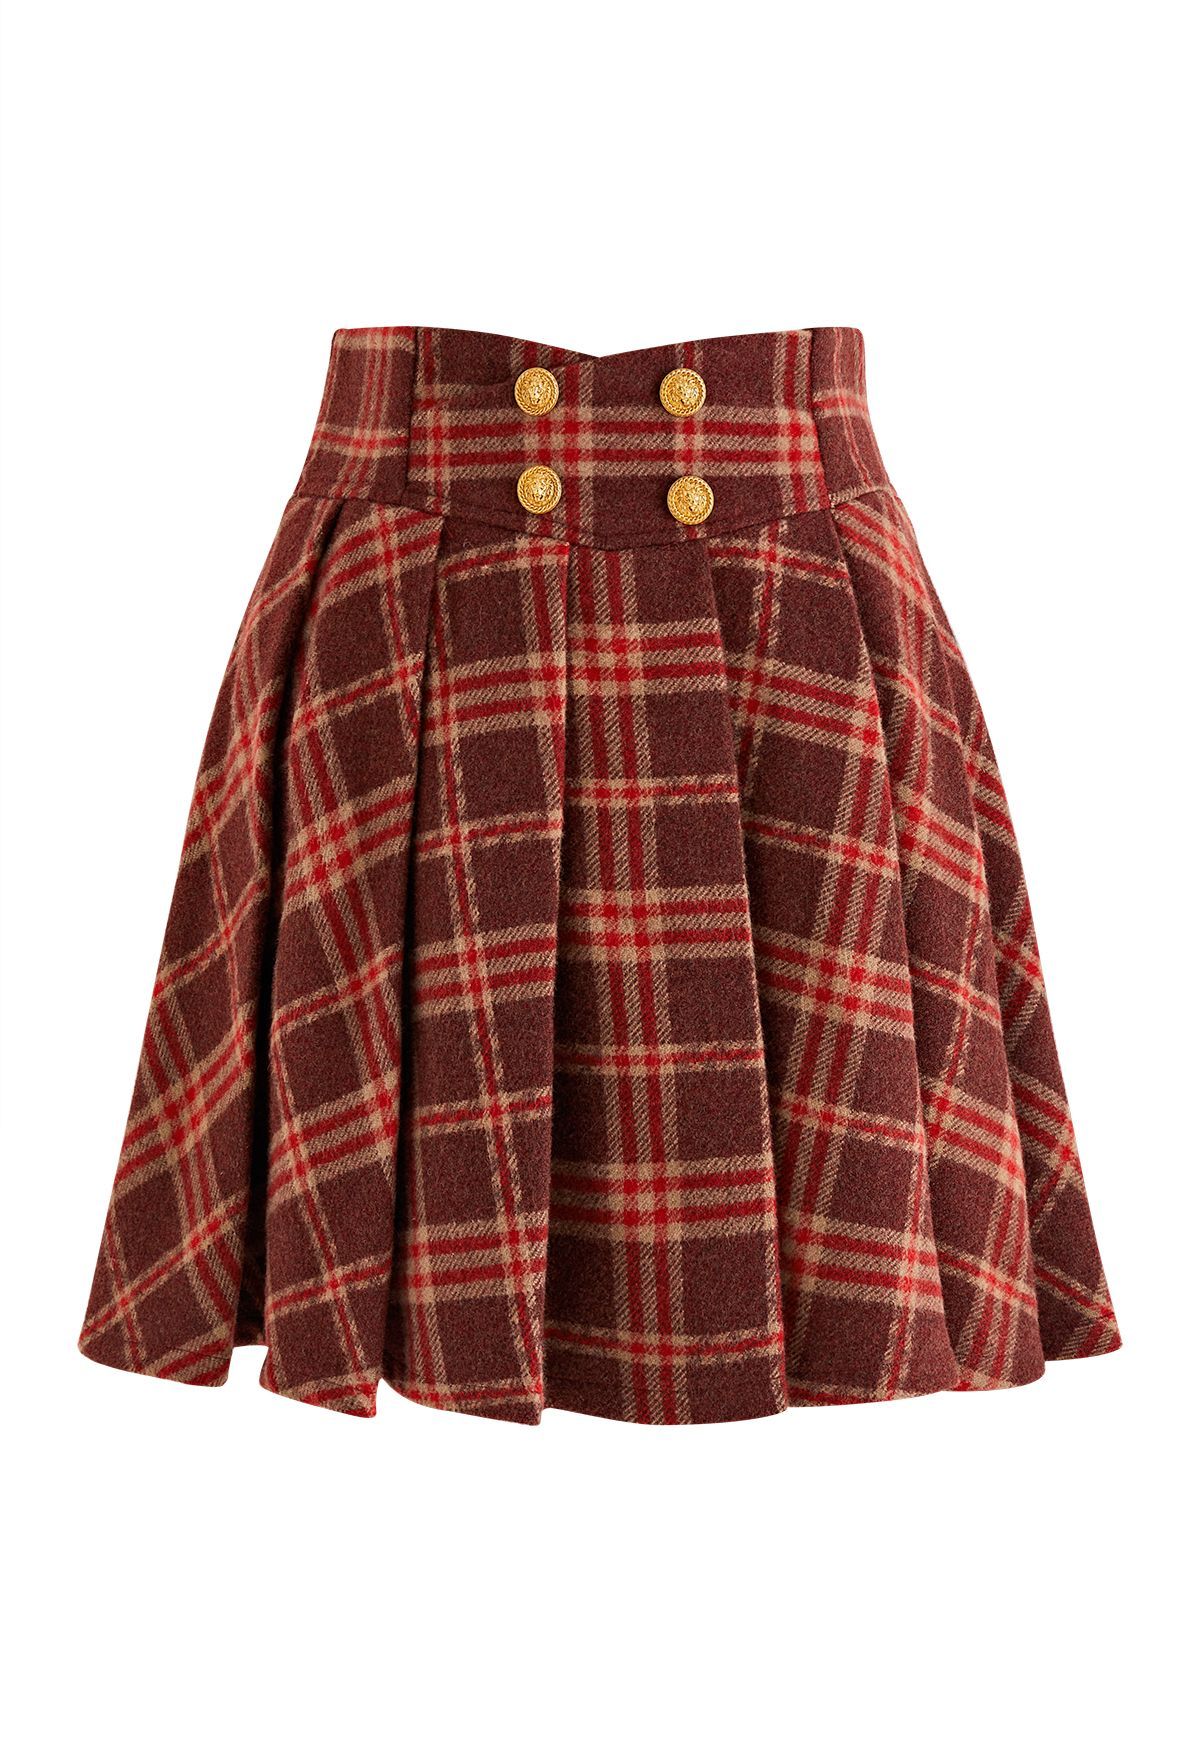 Golden Button Pleated Flare Mini Skirt in Red Plaid | Chicwish